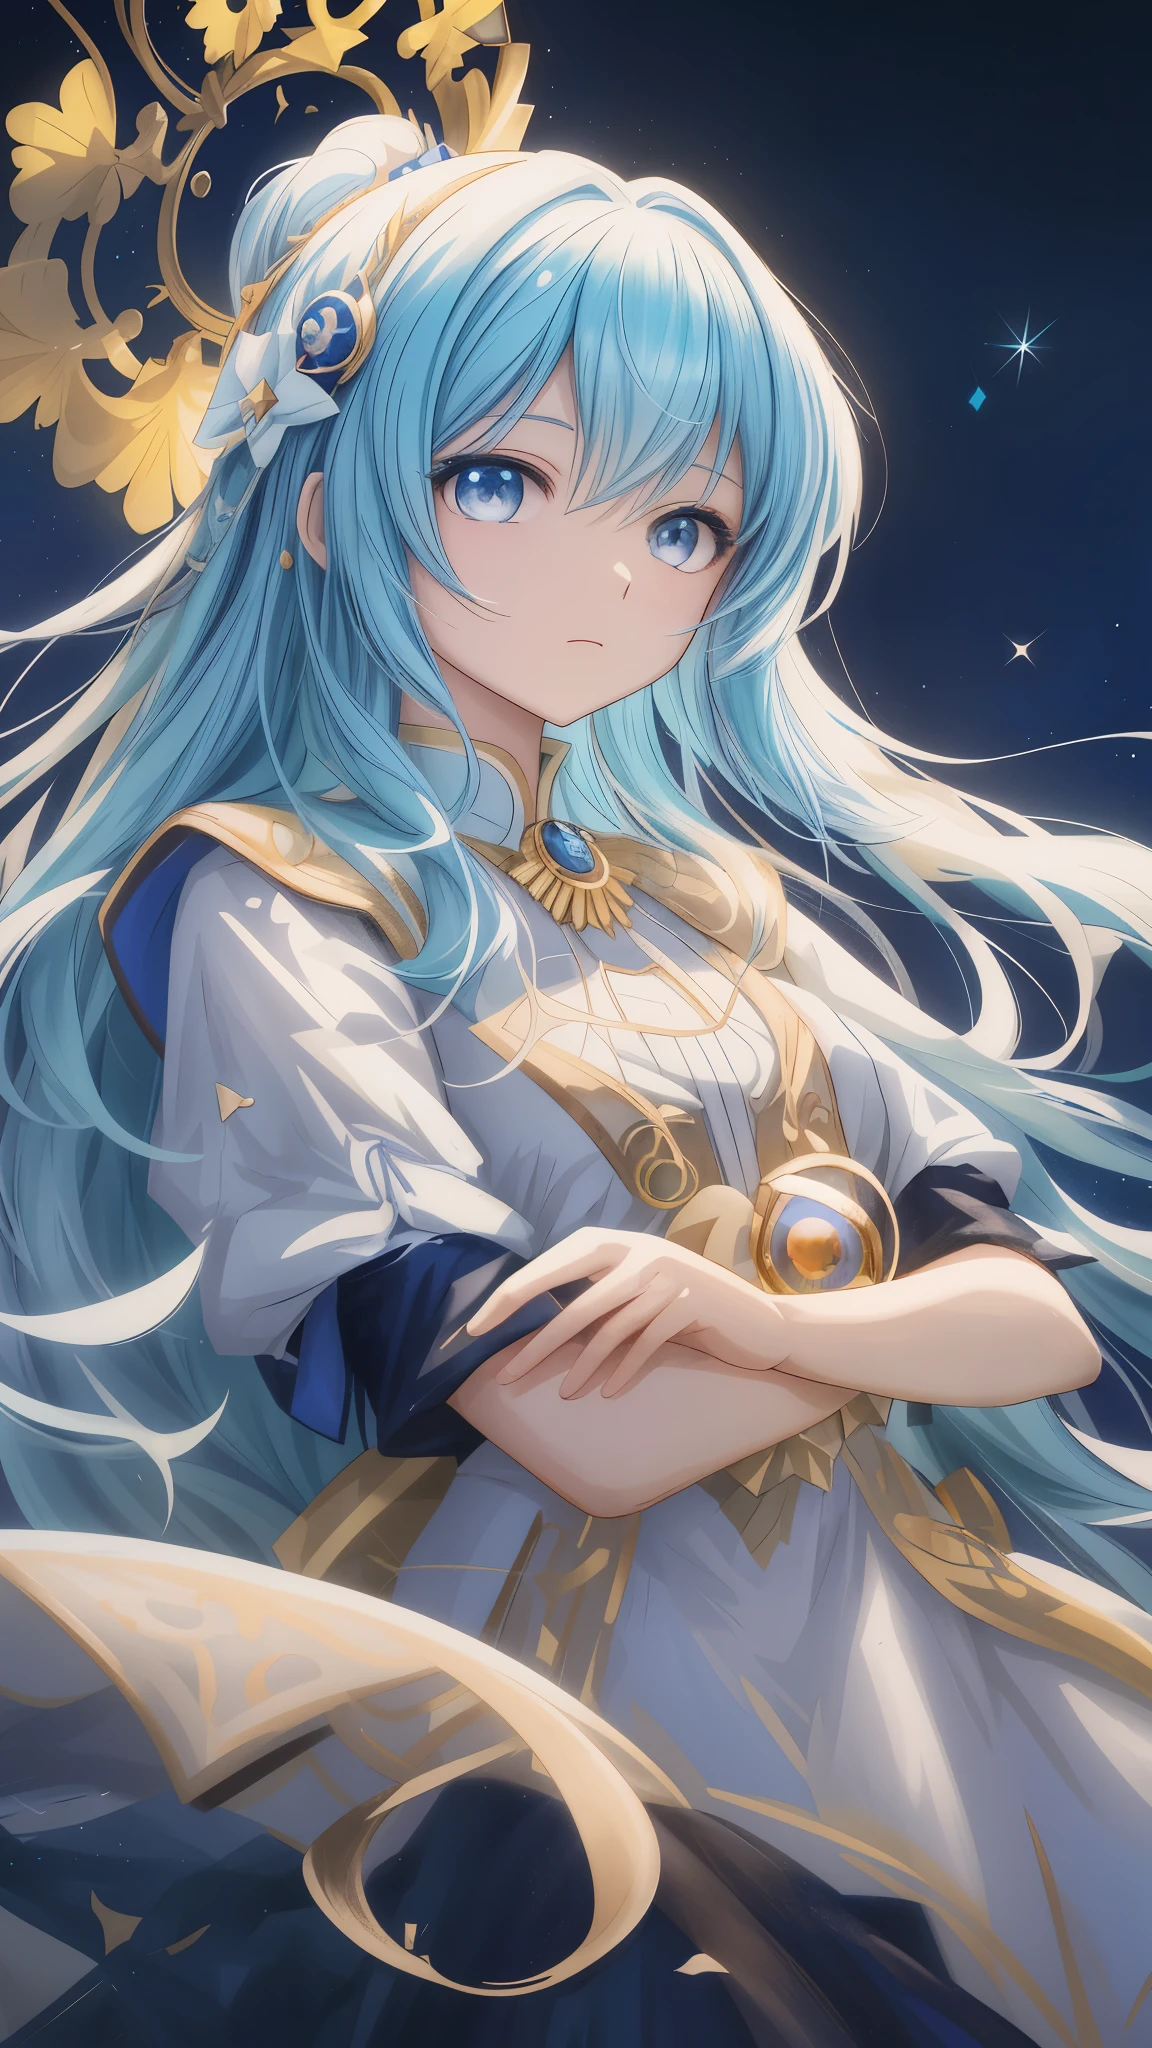 Anime girl with blue hair and a white dress with a golden crown., portrait knights of the zodiac girl, anime goddess, knights of the zodiac girl, detailed digital anime art, trend on artstation pixiv, anime girl with cosmic hair, High quality 8K detailed art, Detailed anime character art, detailed anime art, 4K anime style, Beautiful Celestial Wizard